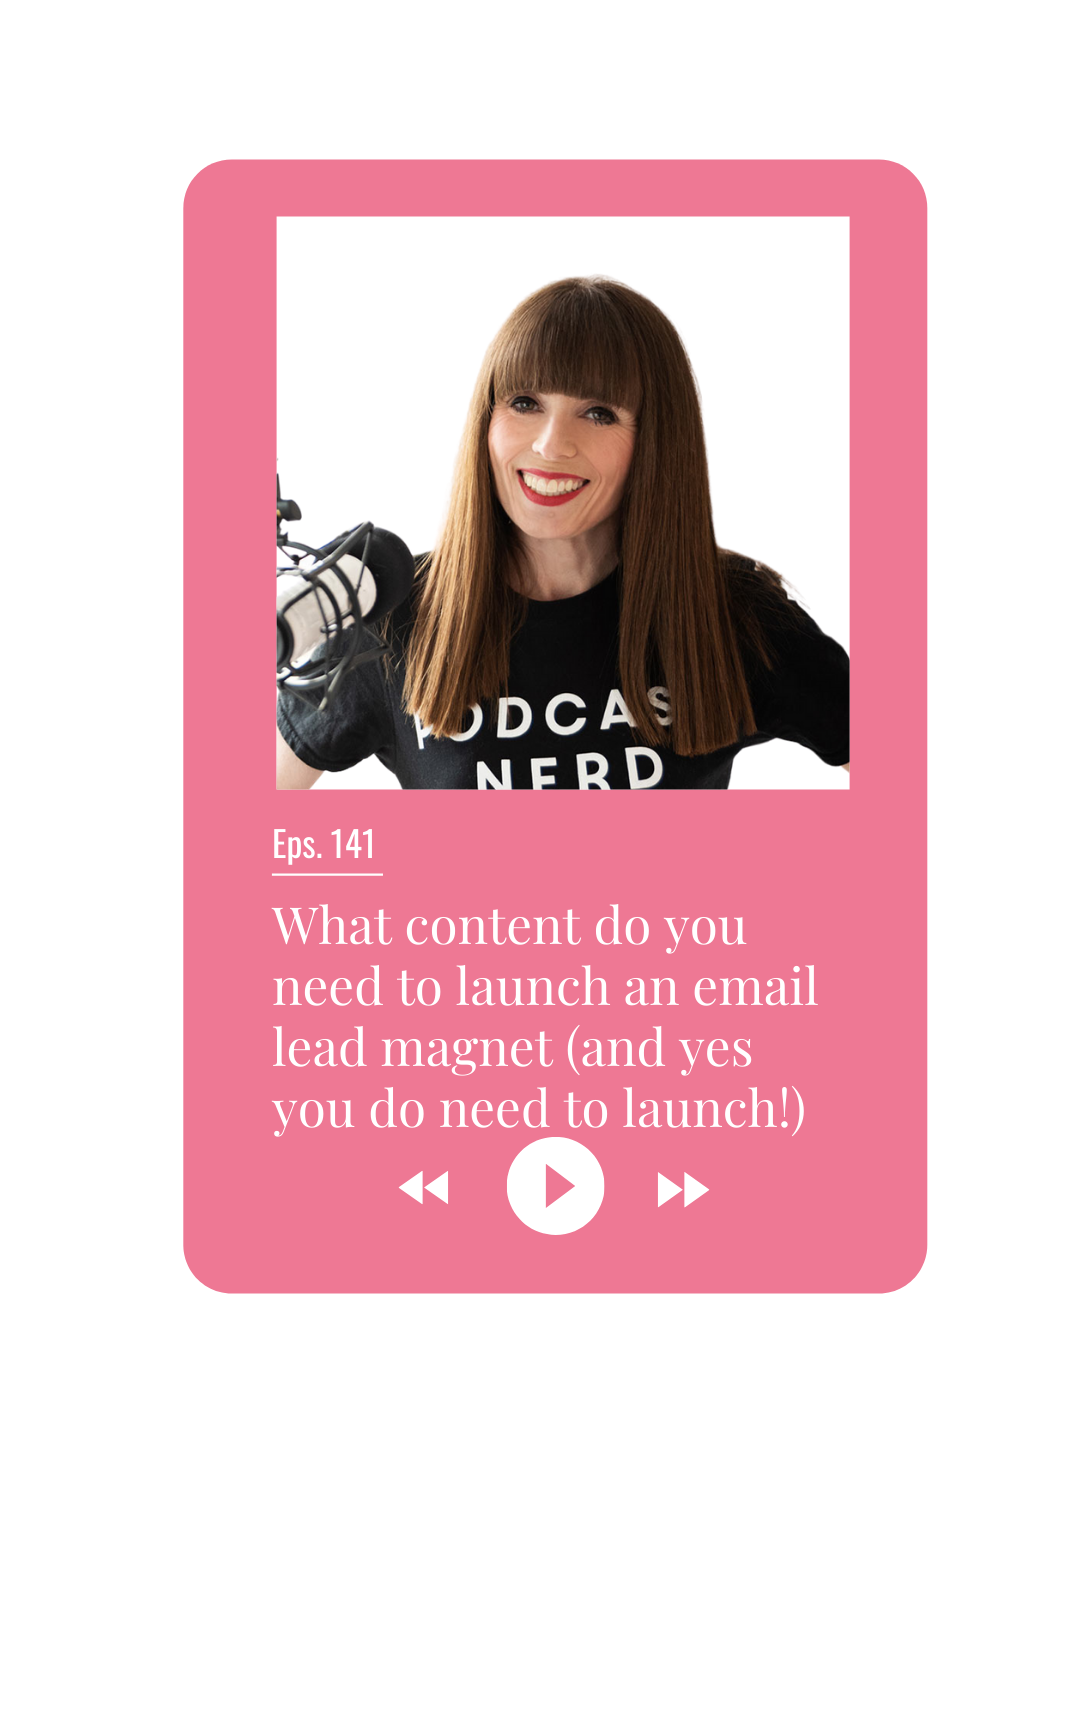 What content do you need to launch an email lead magnet